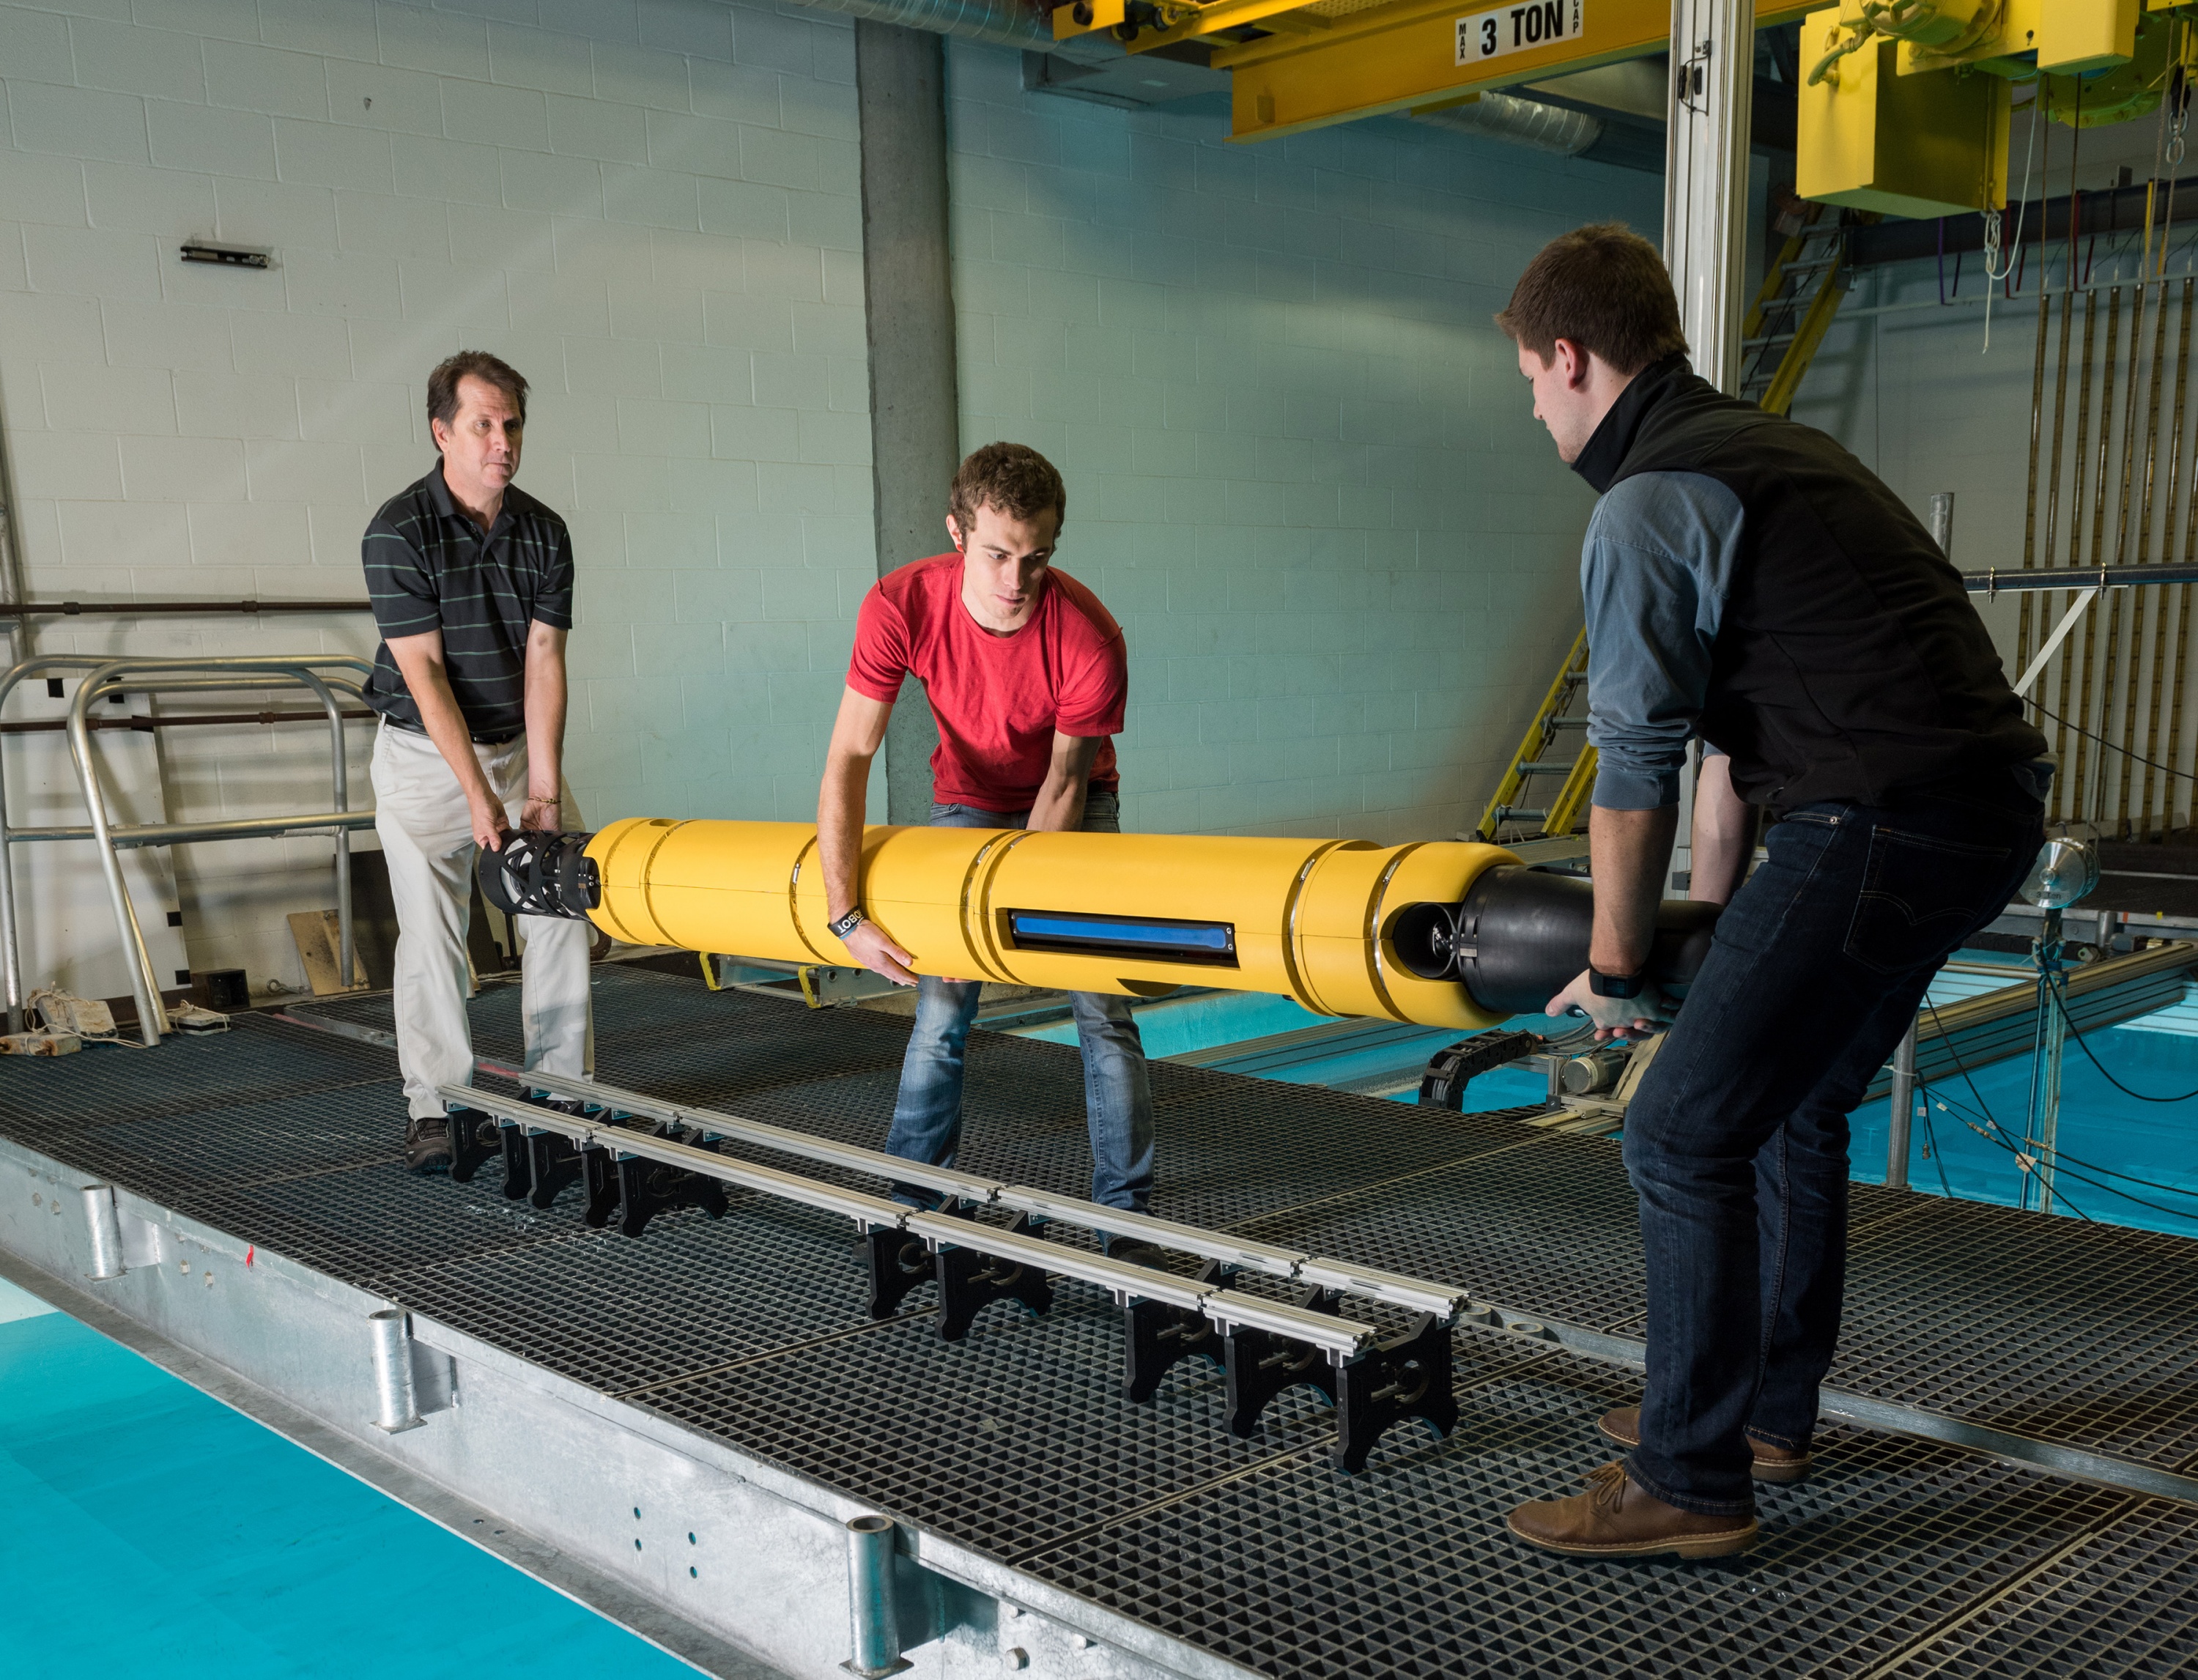 GTRI principal research engineer Mick West, graduate student Jacob Buffo of the School of Earth and Atmospheric Sciences, and undergraduate Matthew Meister of the School of Mechanical Engineering handle the 210-pound Icefin at Georgia Tech’s Underwater Acoustics Research Laboratory.